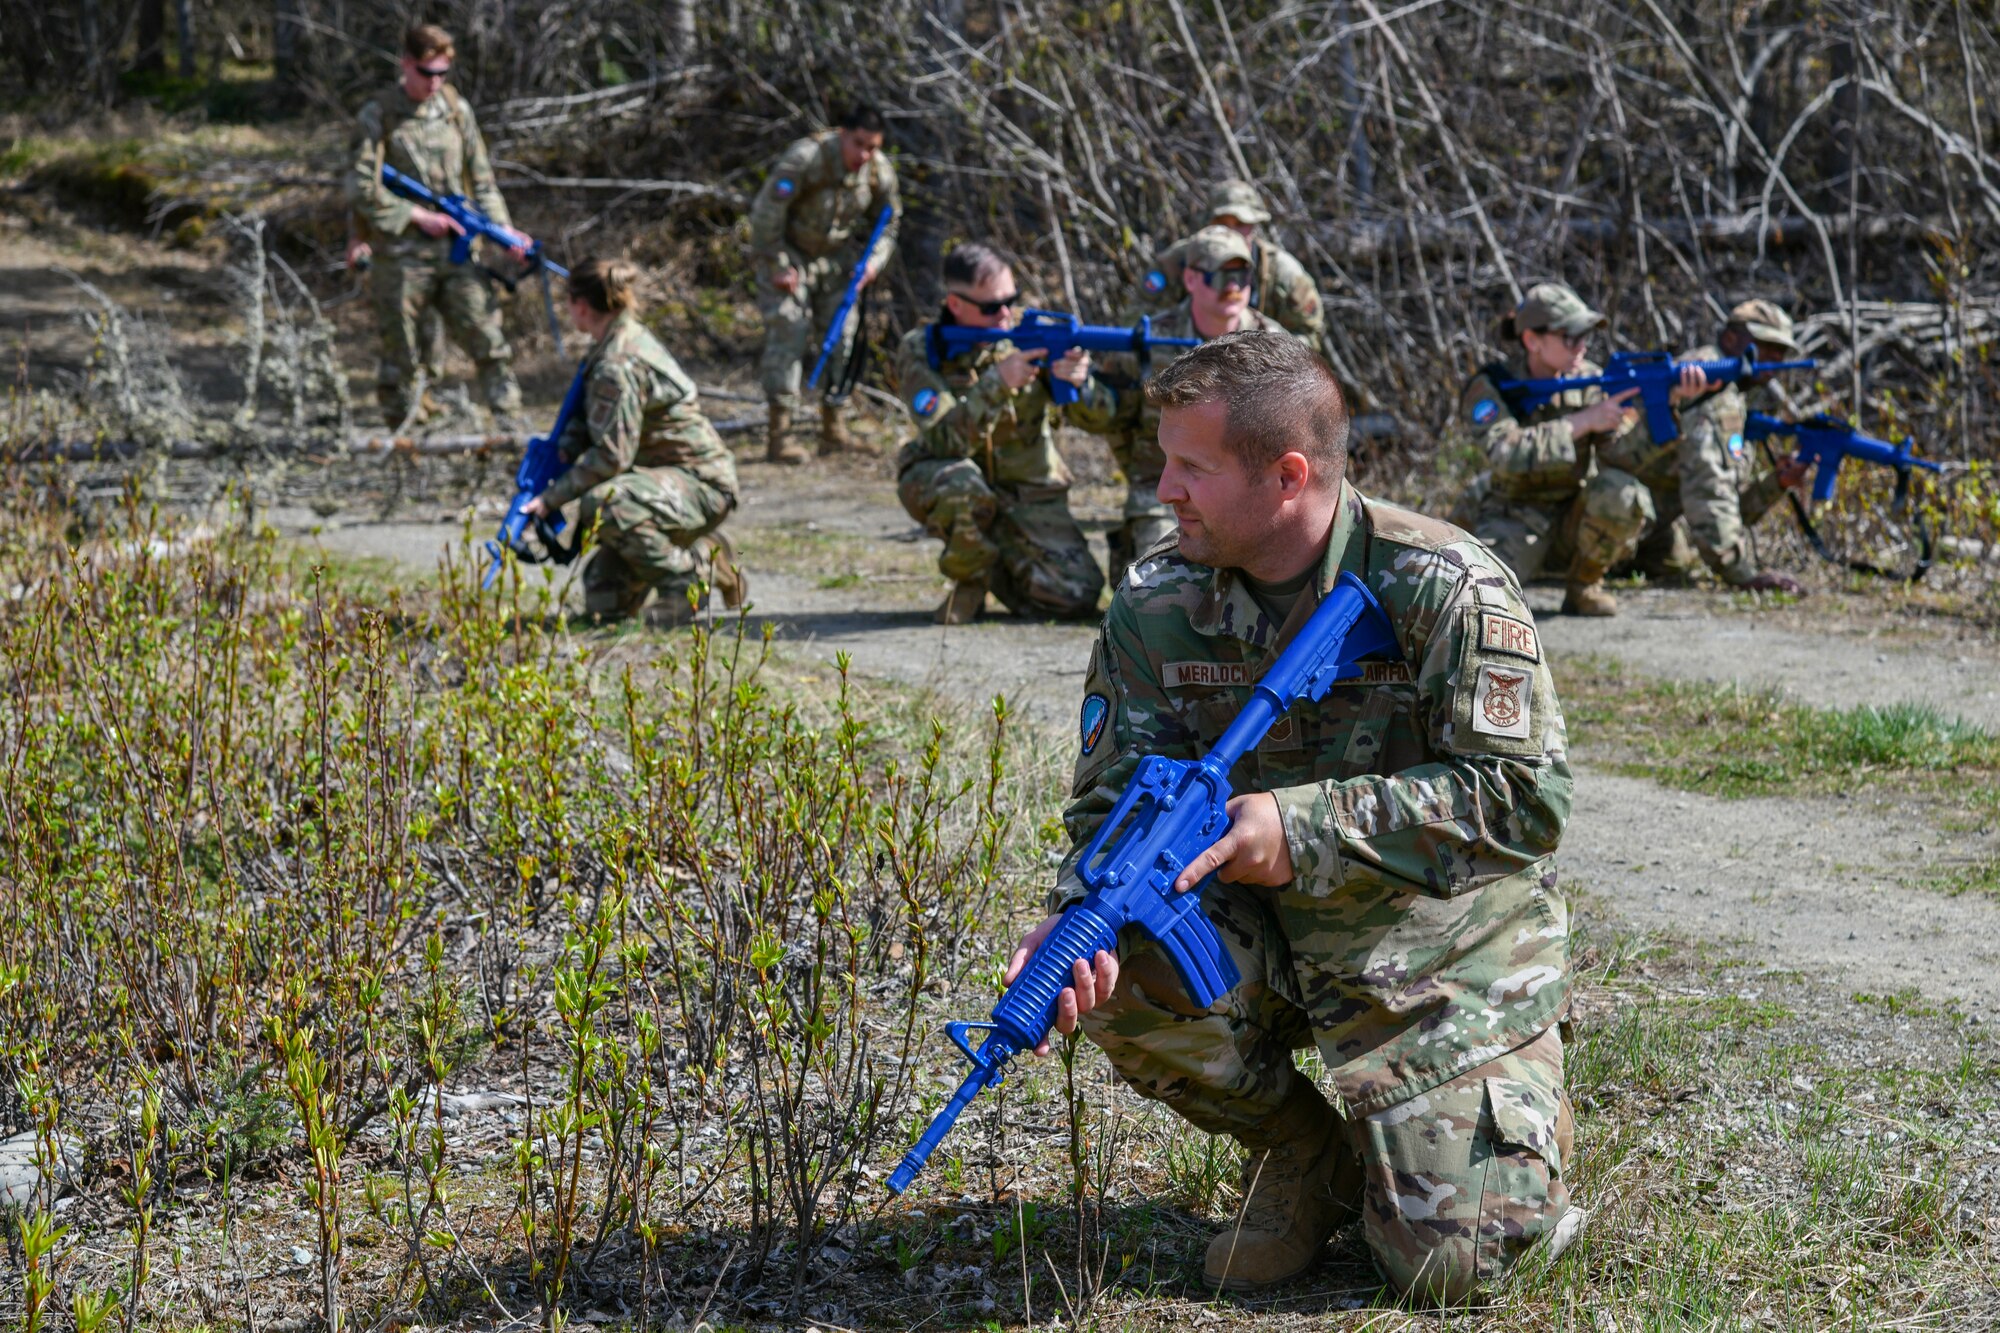 A photo of Airmen of the 177th, 108th, and 111th Civil Engineer Squadrons participating in training.